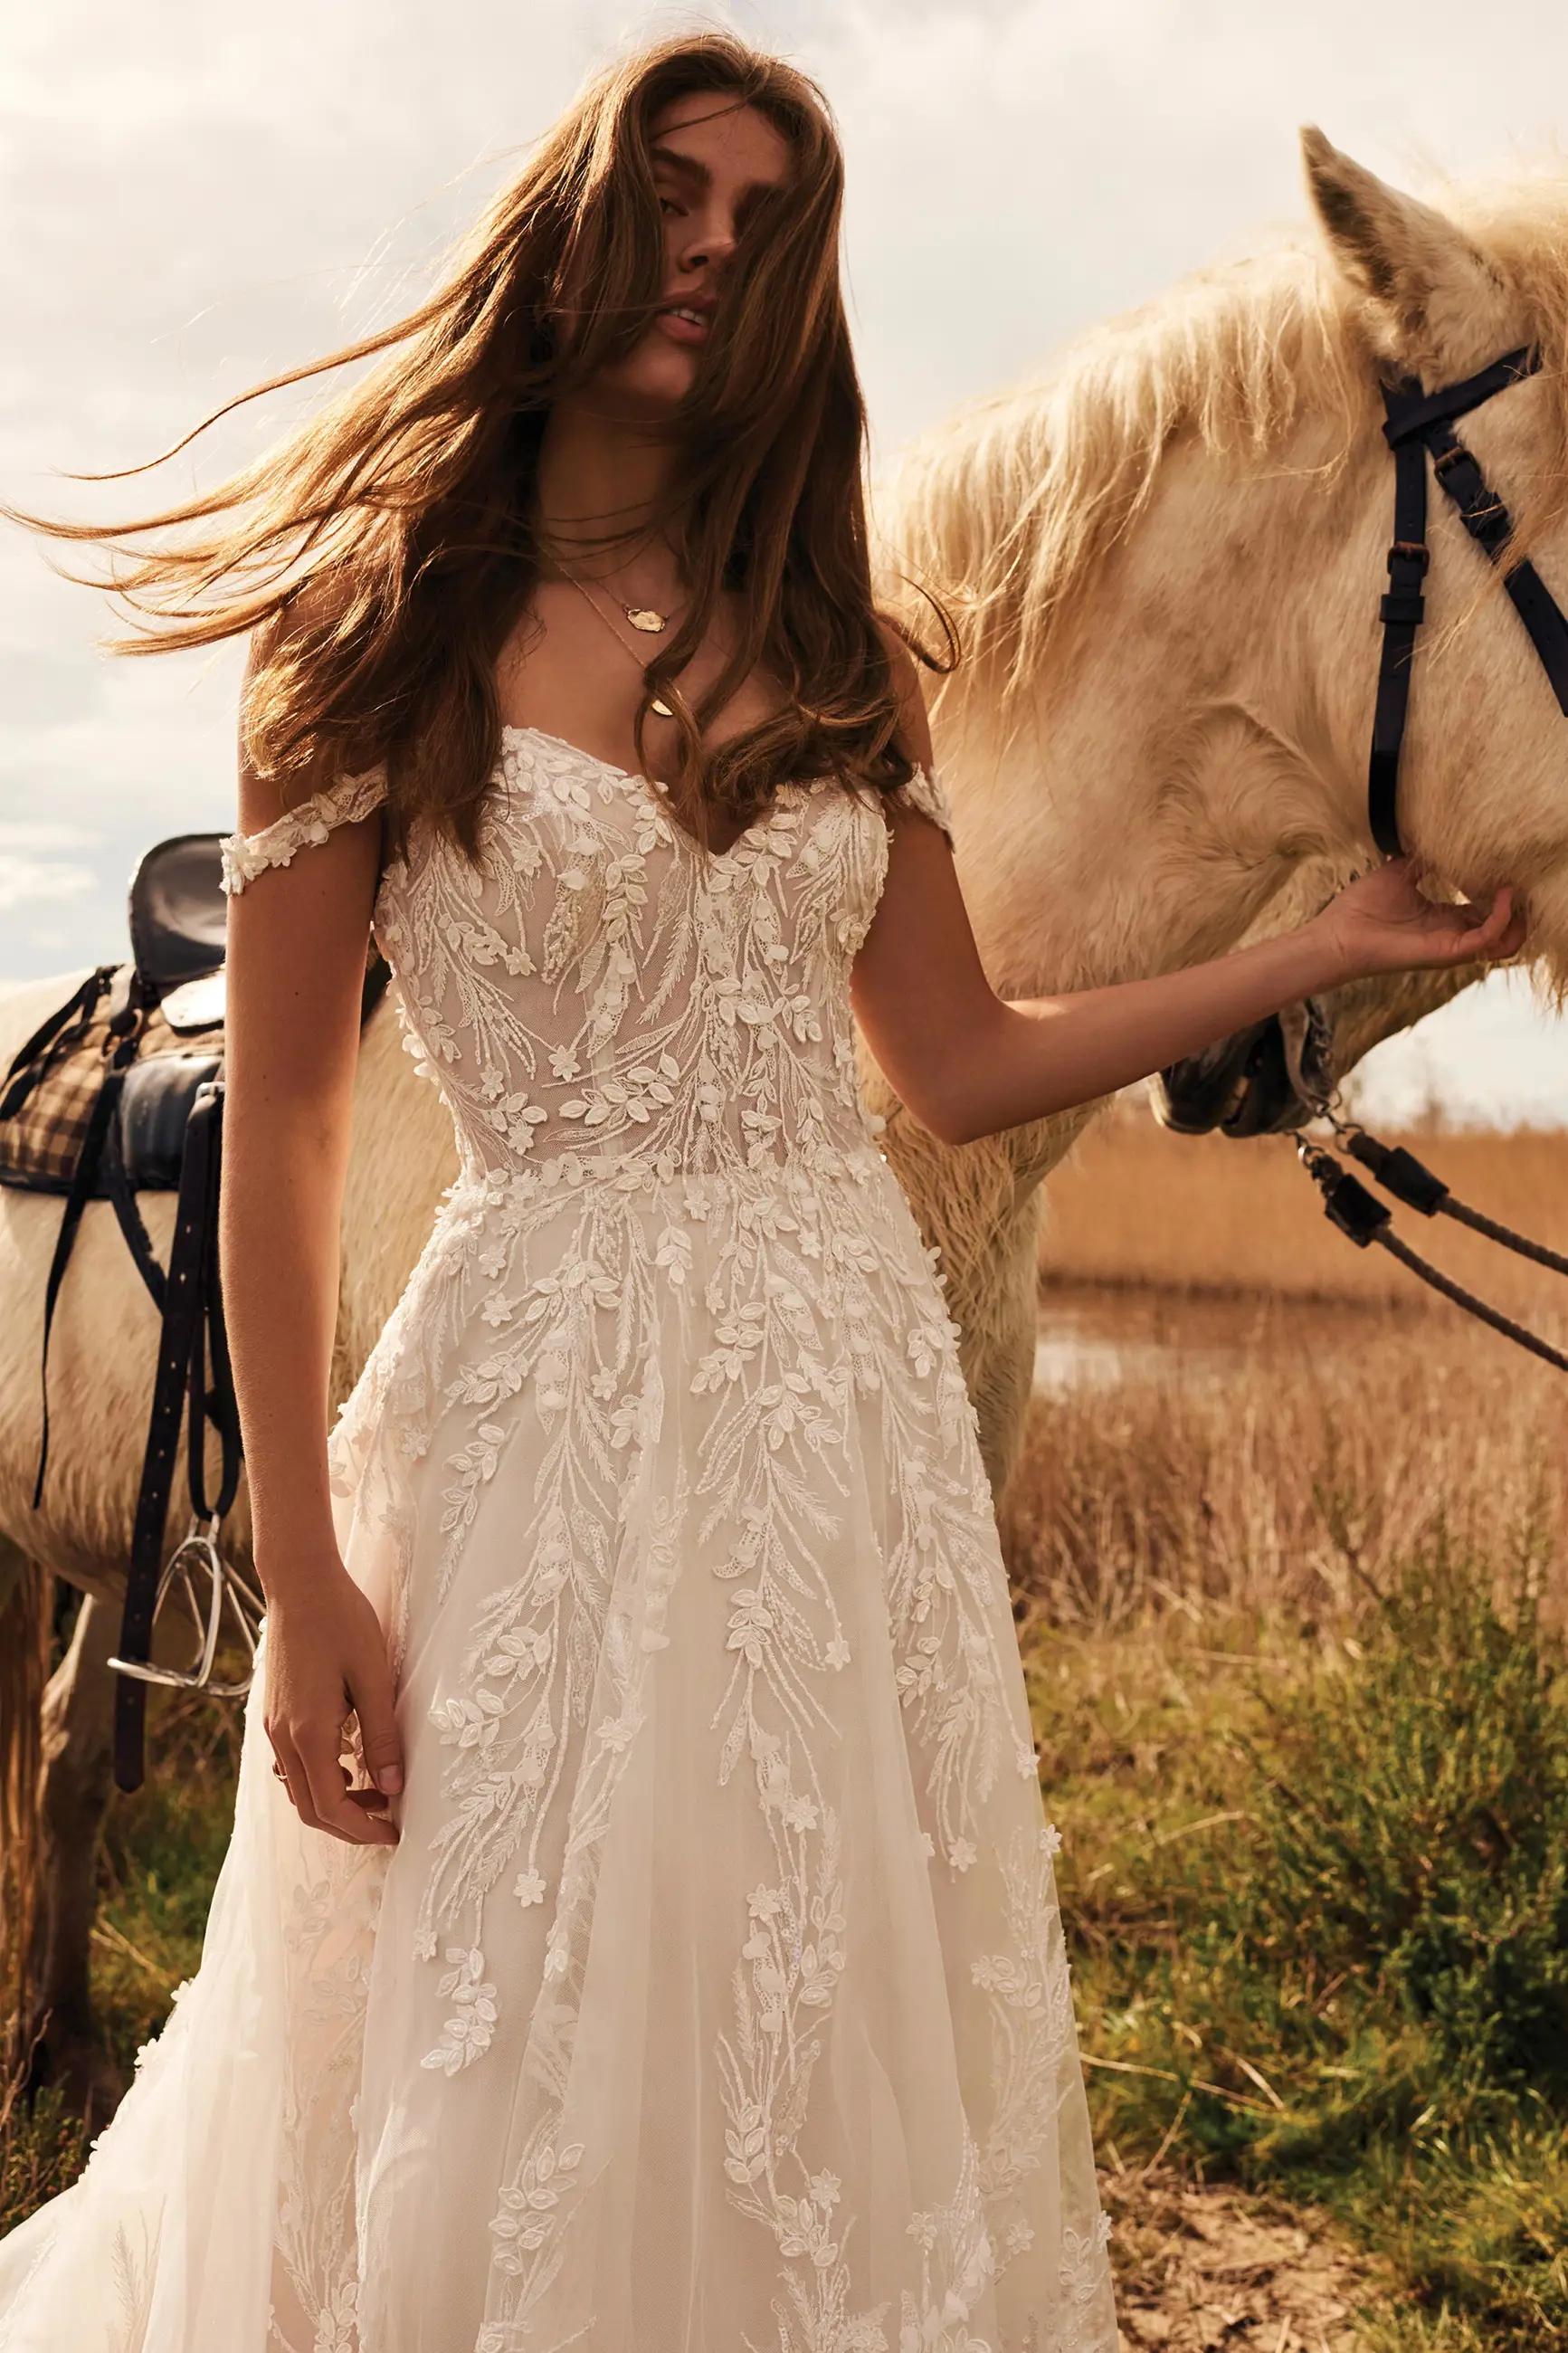 Elegant and Timeless: Classic Equestrian Style Wedding Dresses Image